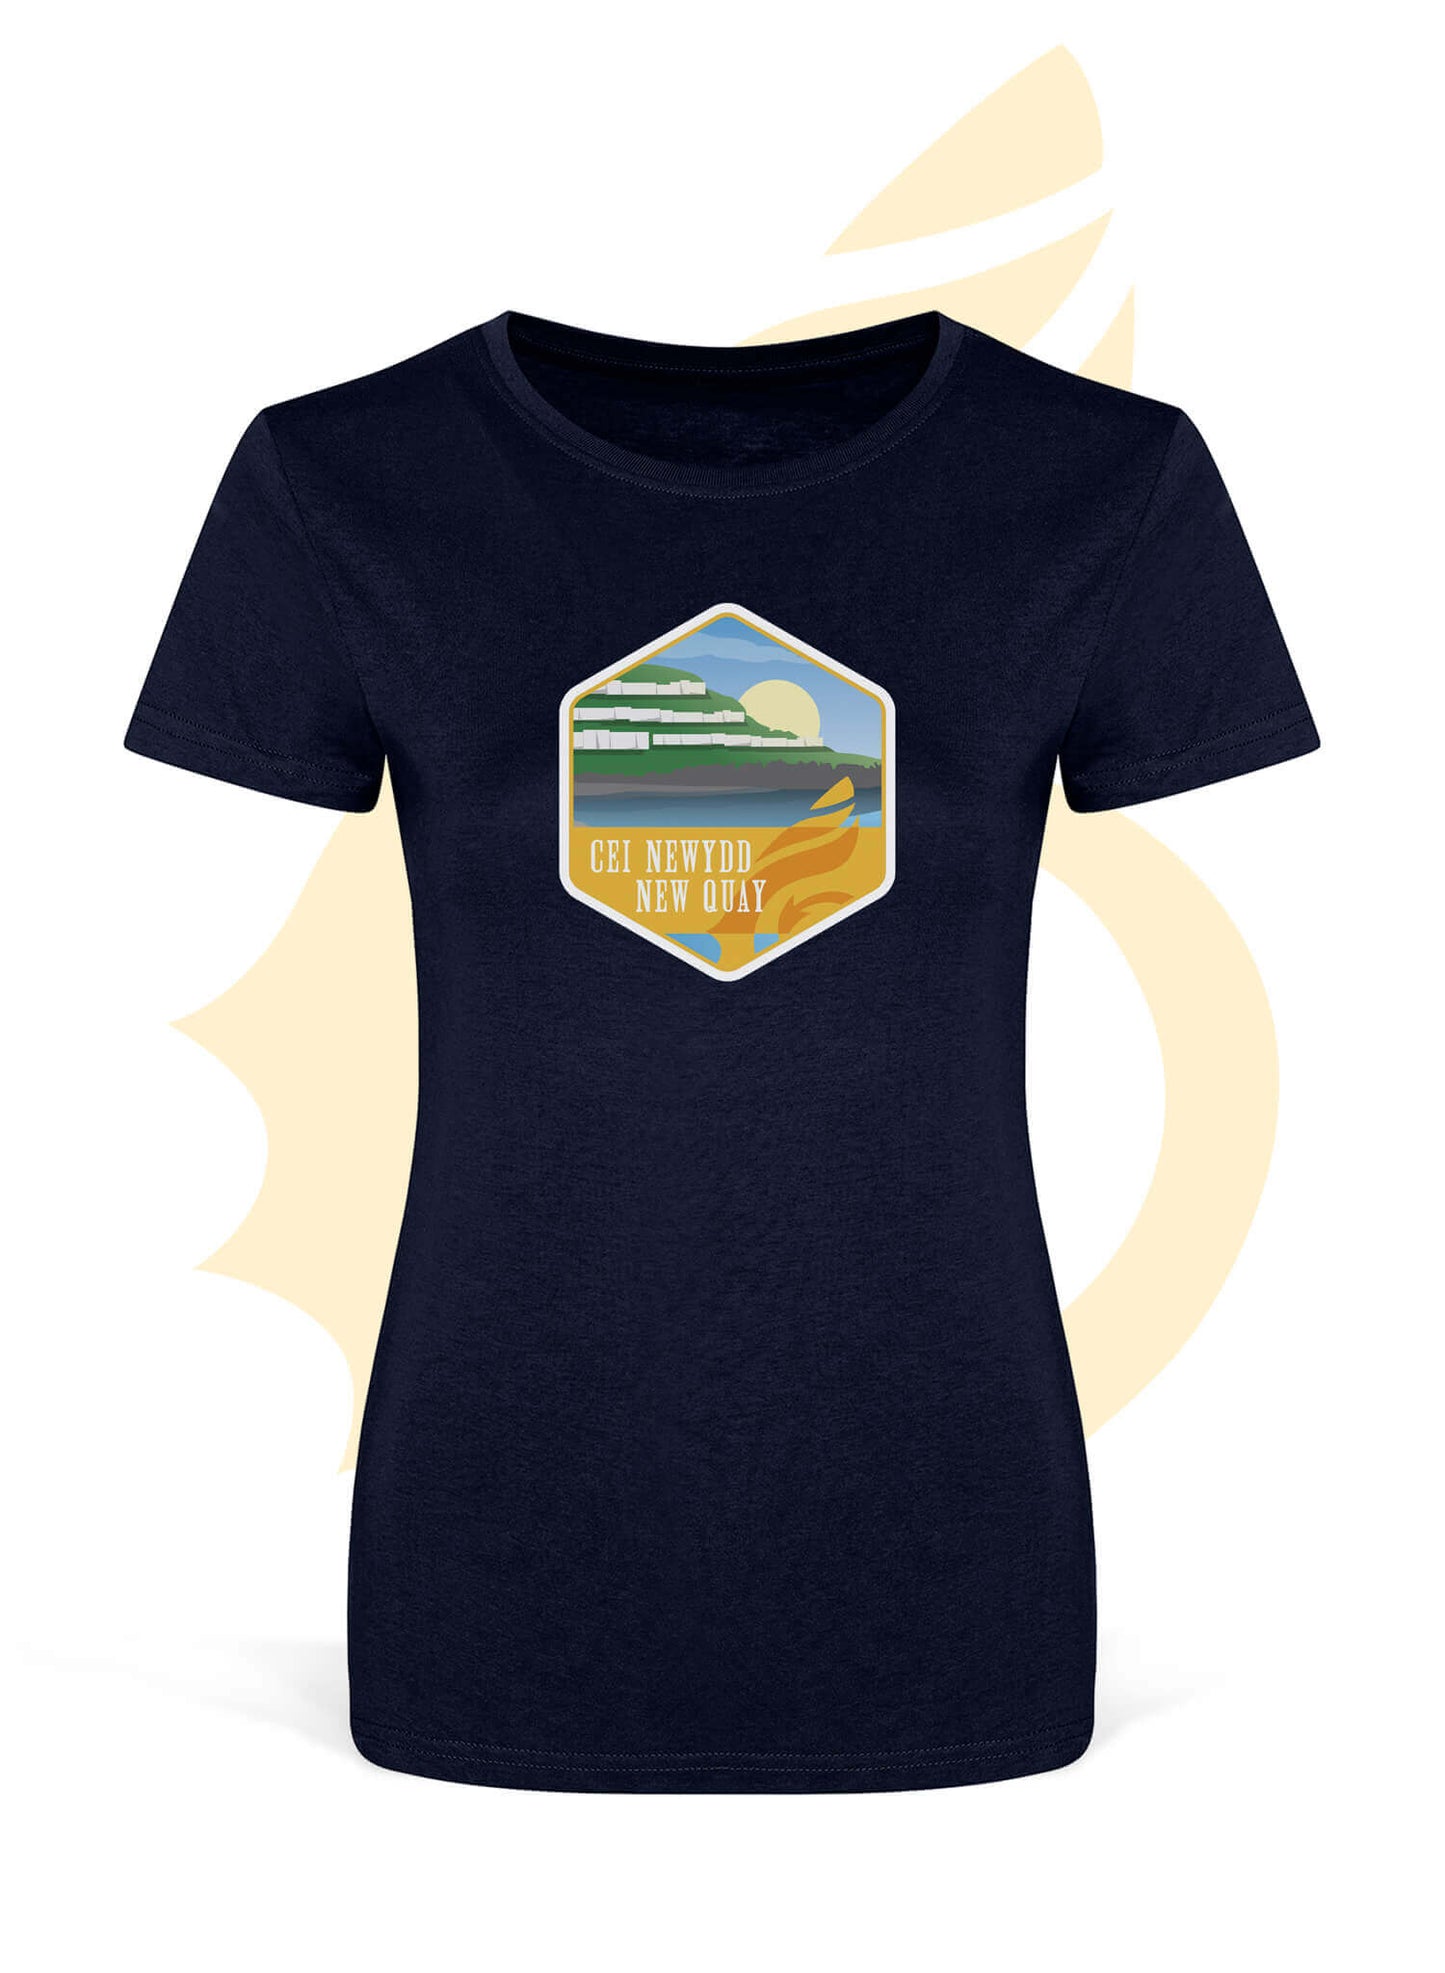 Wales Coast Path womens fitted t-shirt with New Quay design